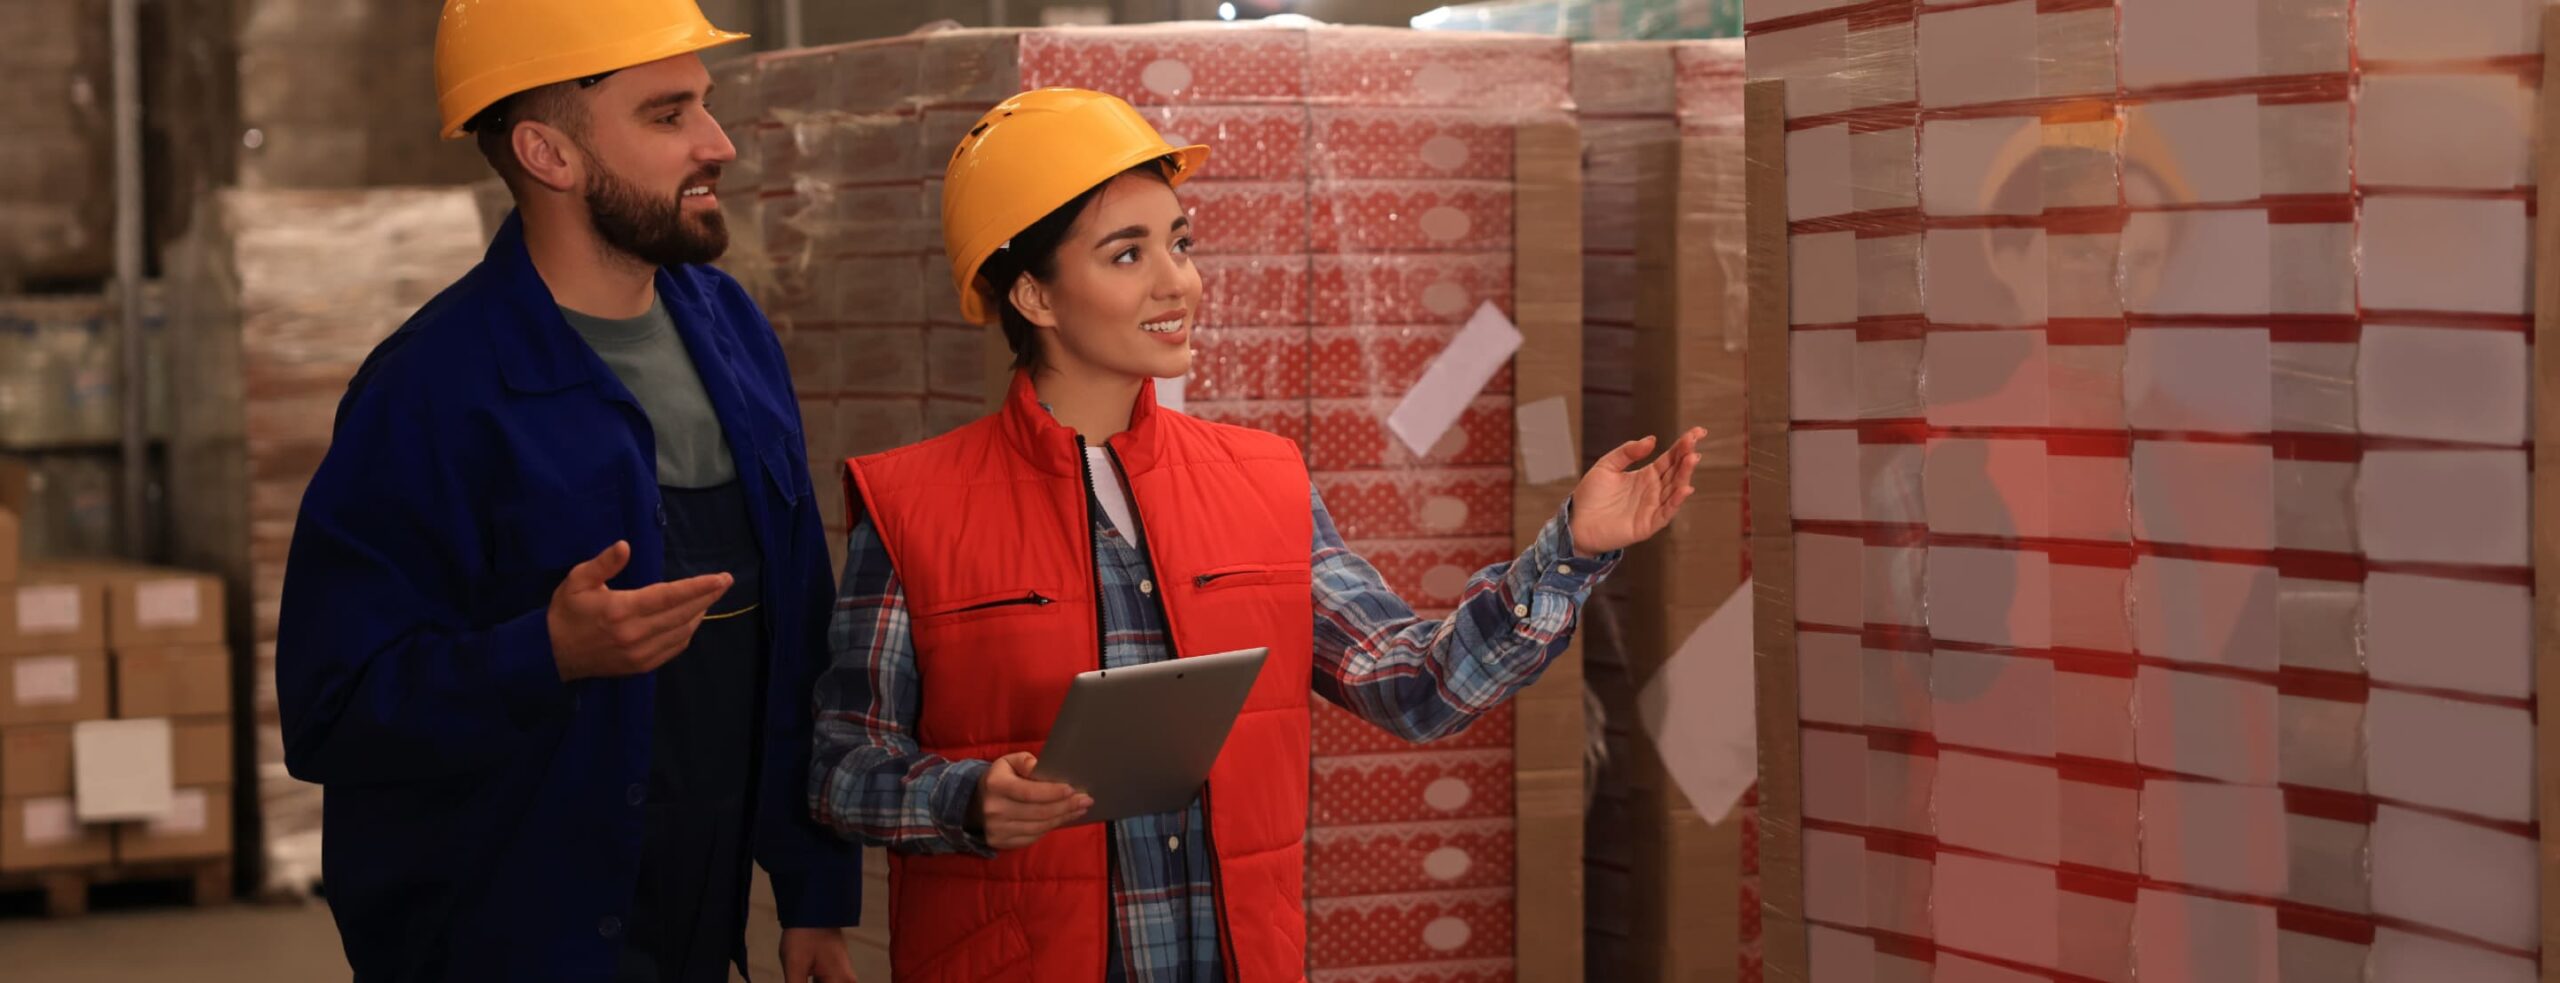 Two facility managers in a warehouse